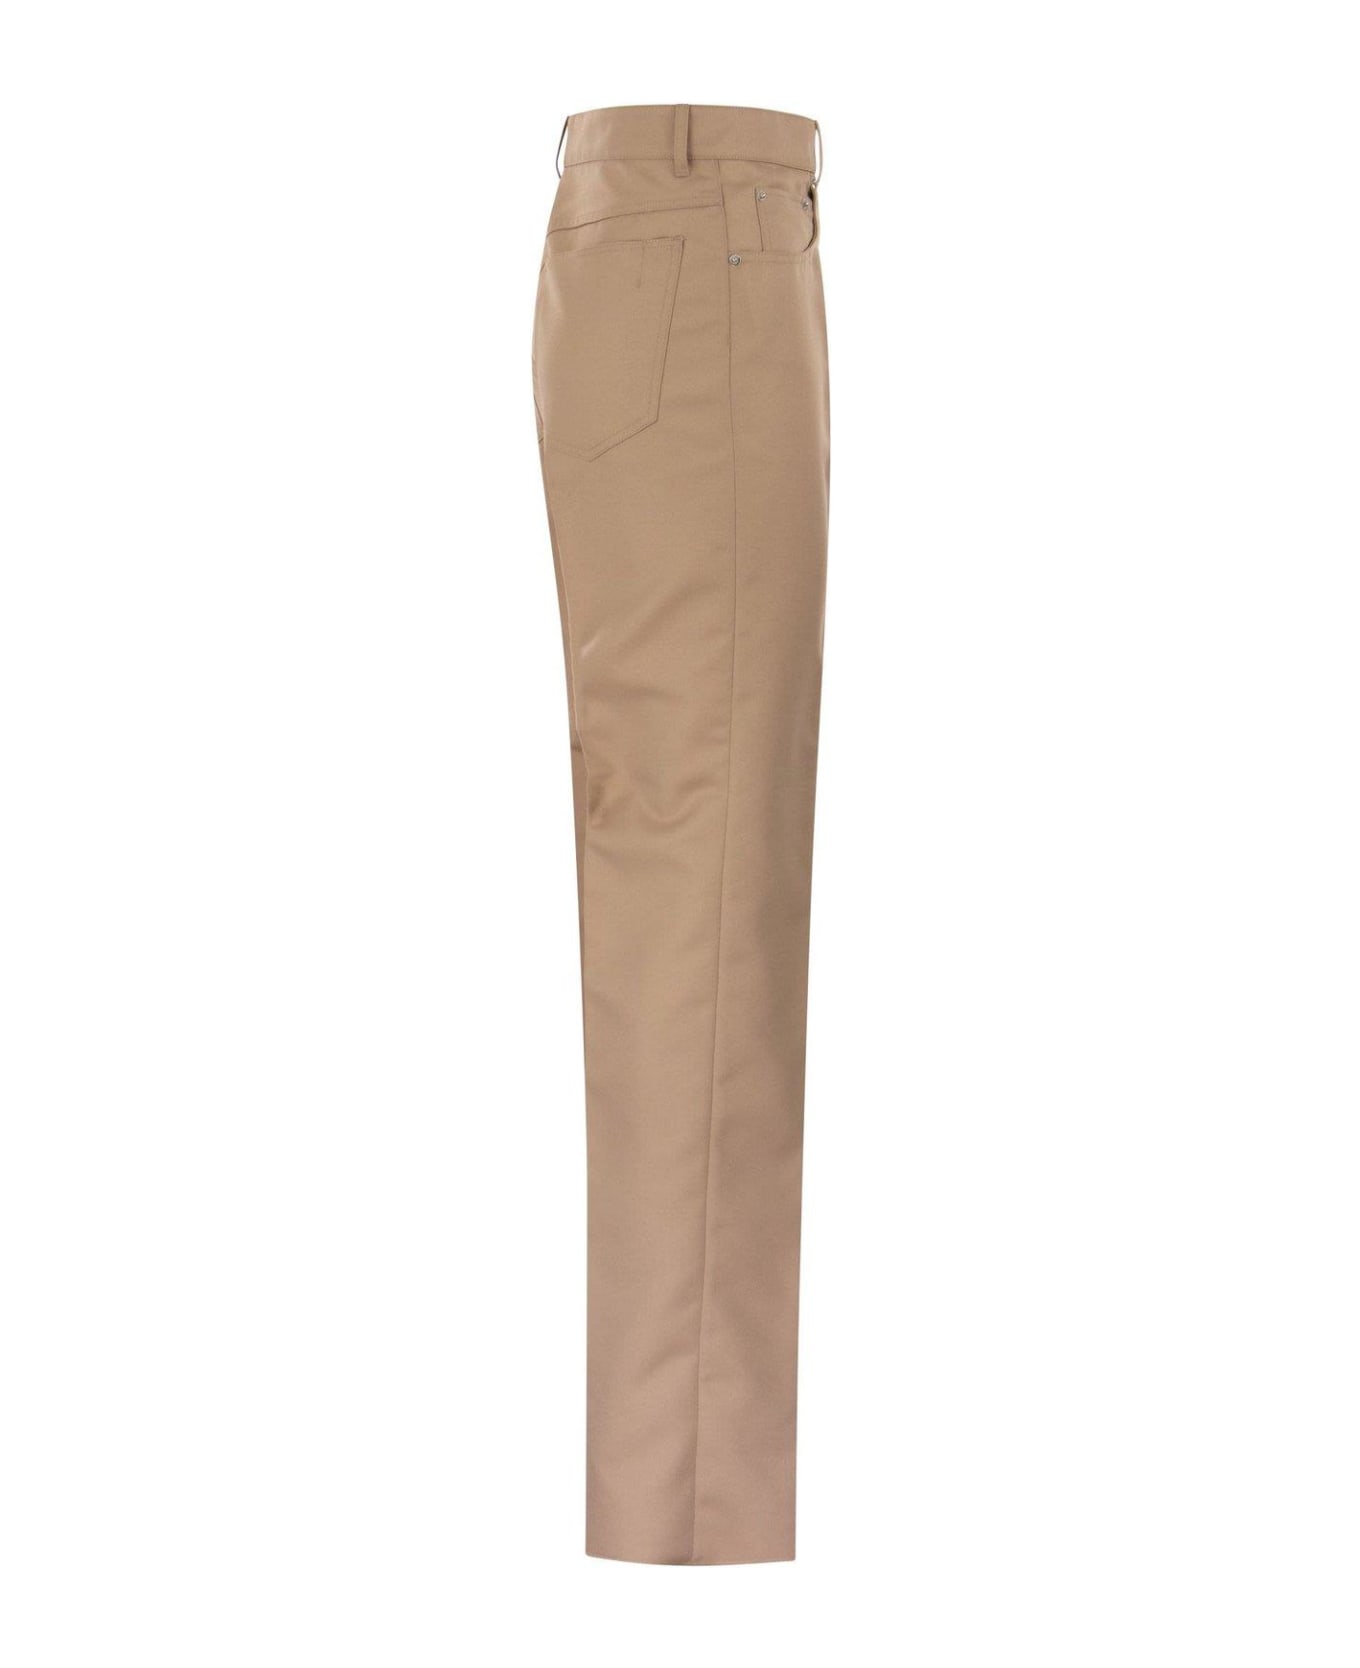 SportMax High-waisted Slim-fit Trousers - Beige